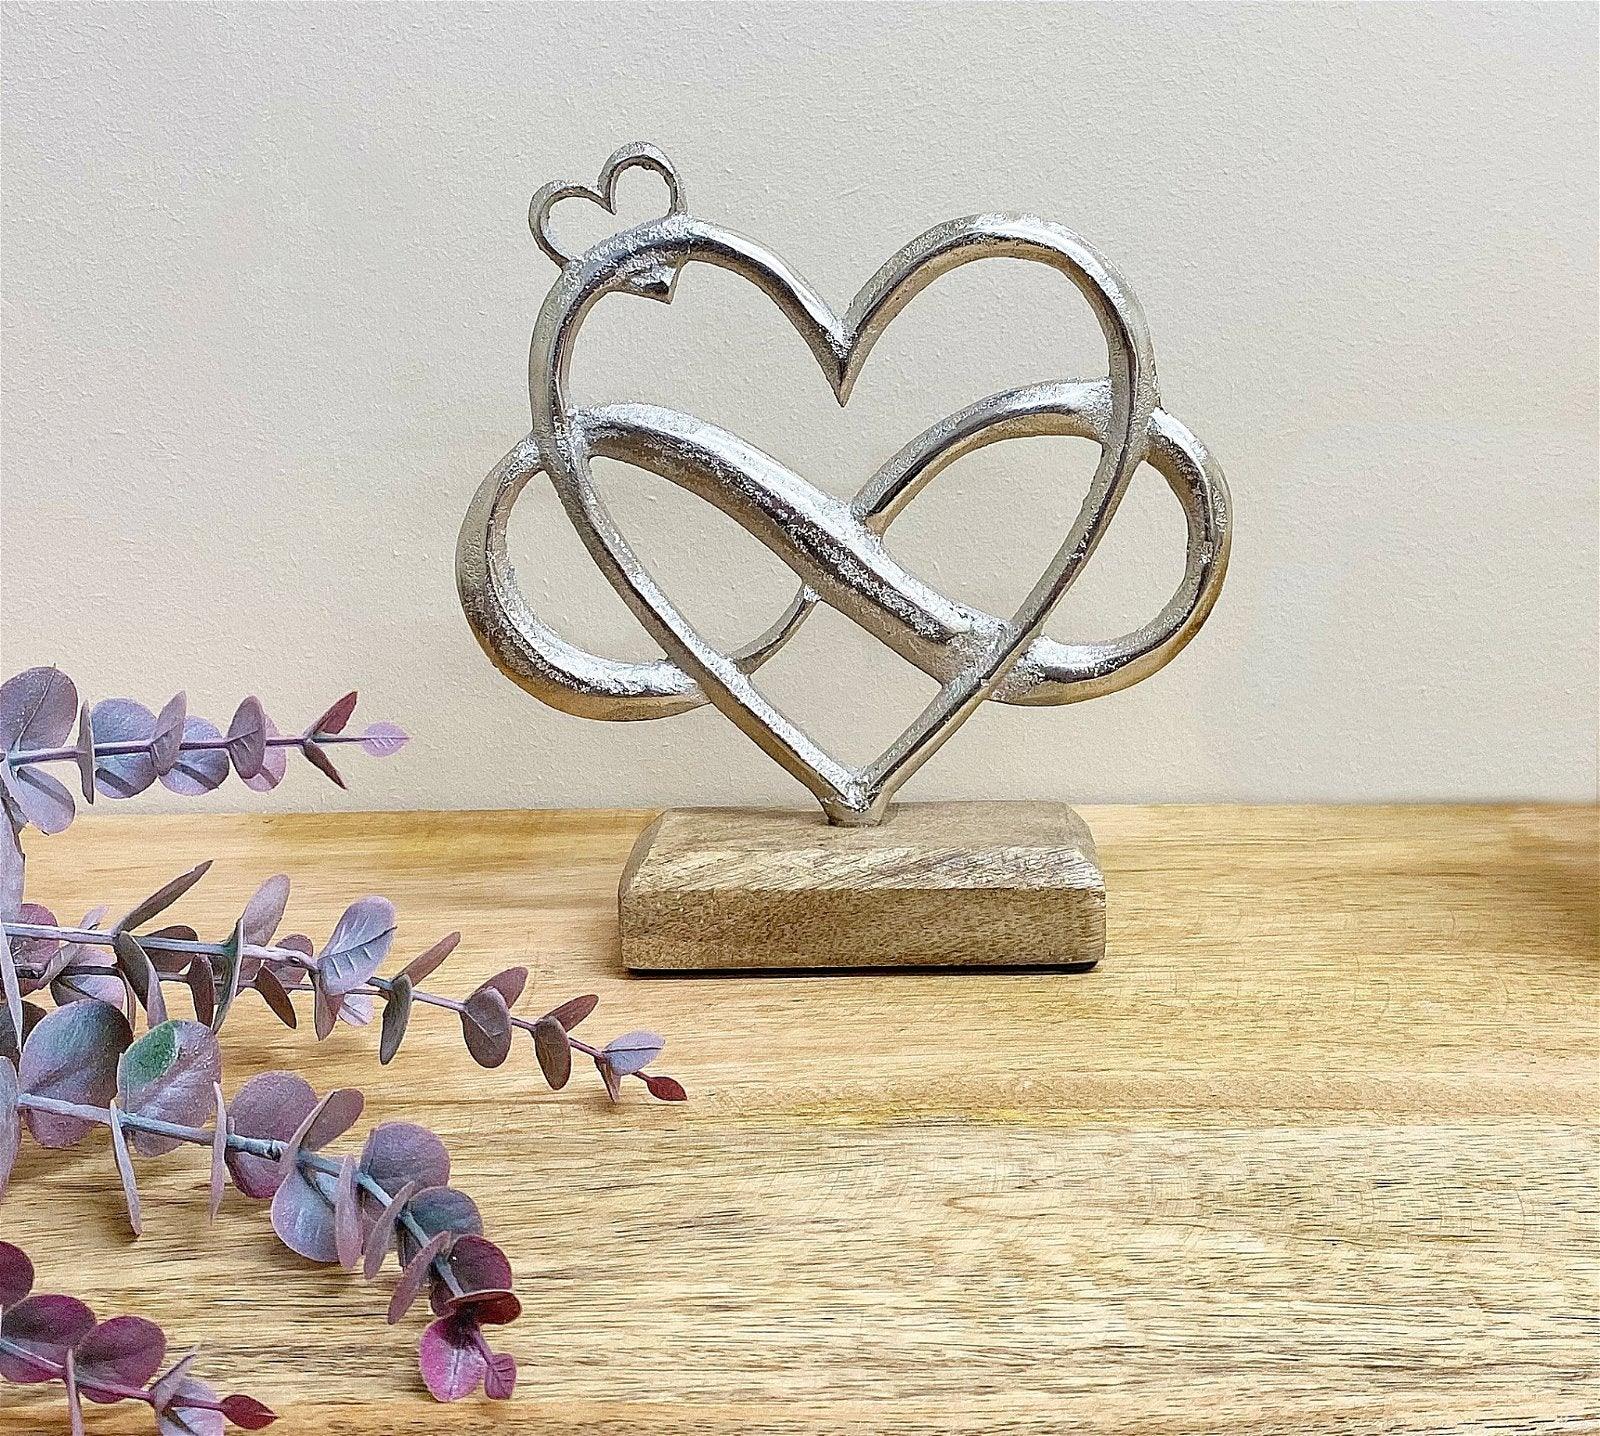 Metal Silver Entwined Hearts On A Wooden Base Small - £15.99 - 